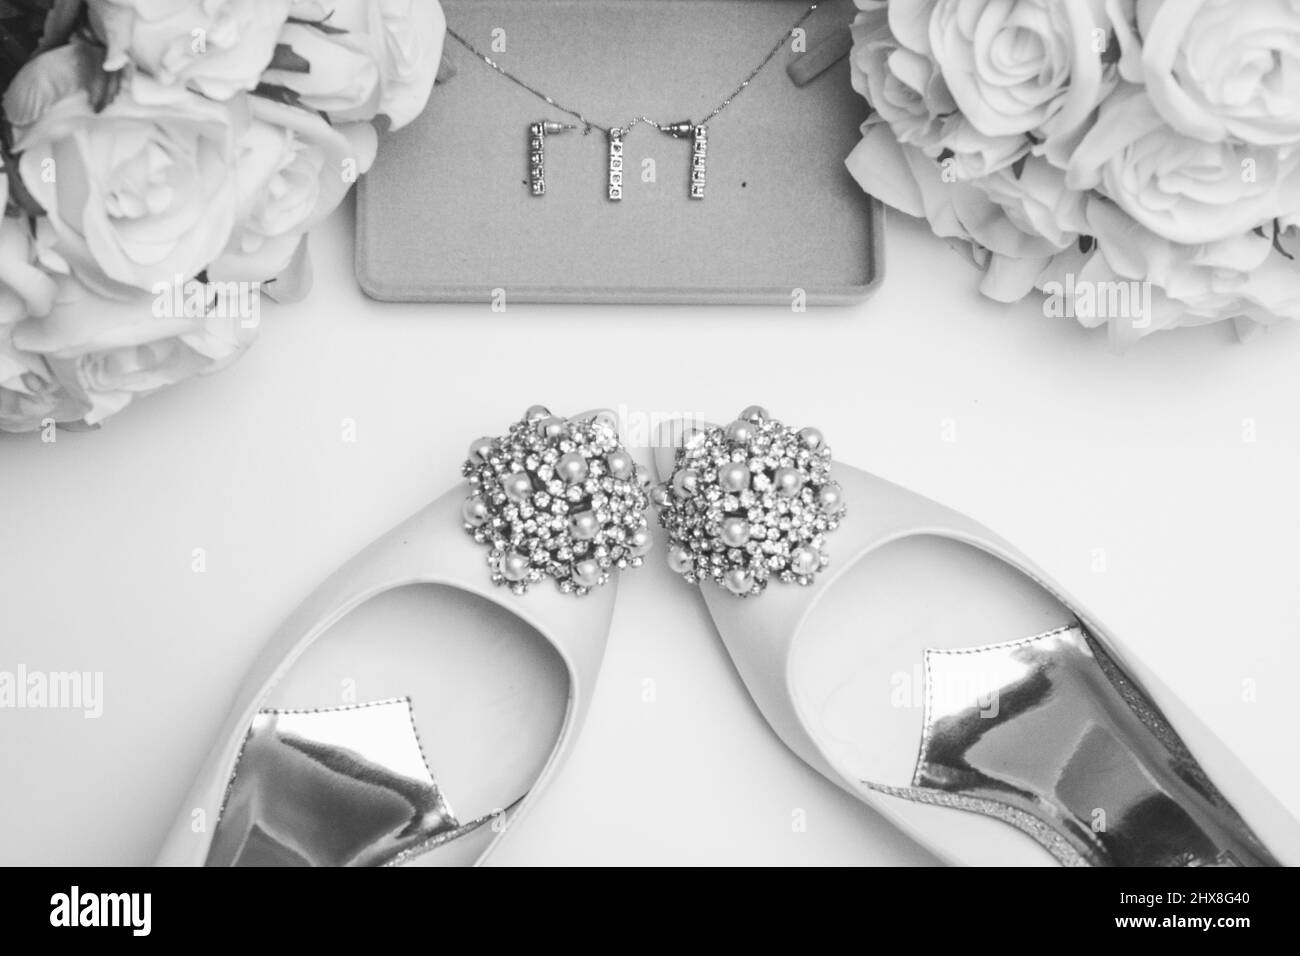 Wedding accessories on a clean white background. Shoes, flowers and Jewellery Stock Photo